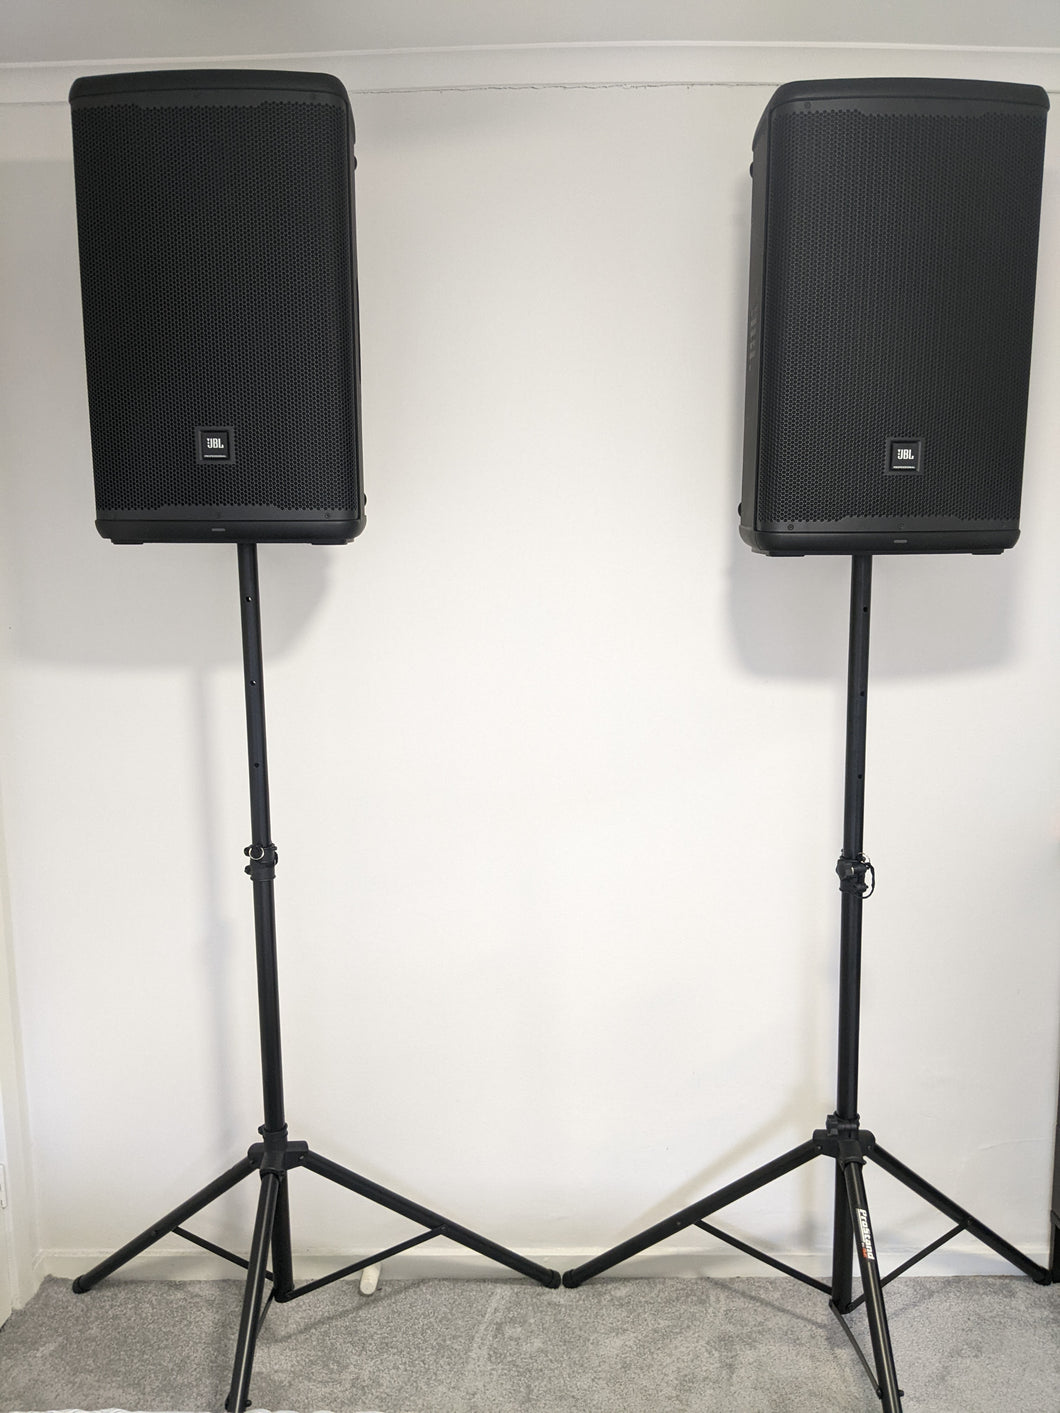 JBL EON715 Tower Speakers (1300W) for Hire